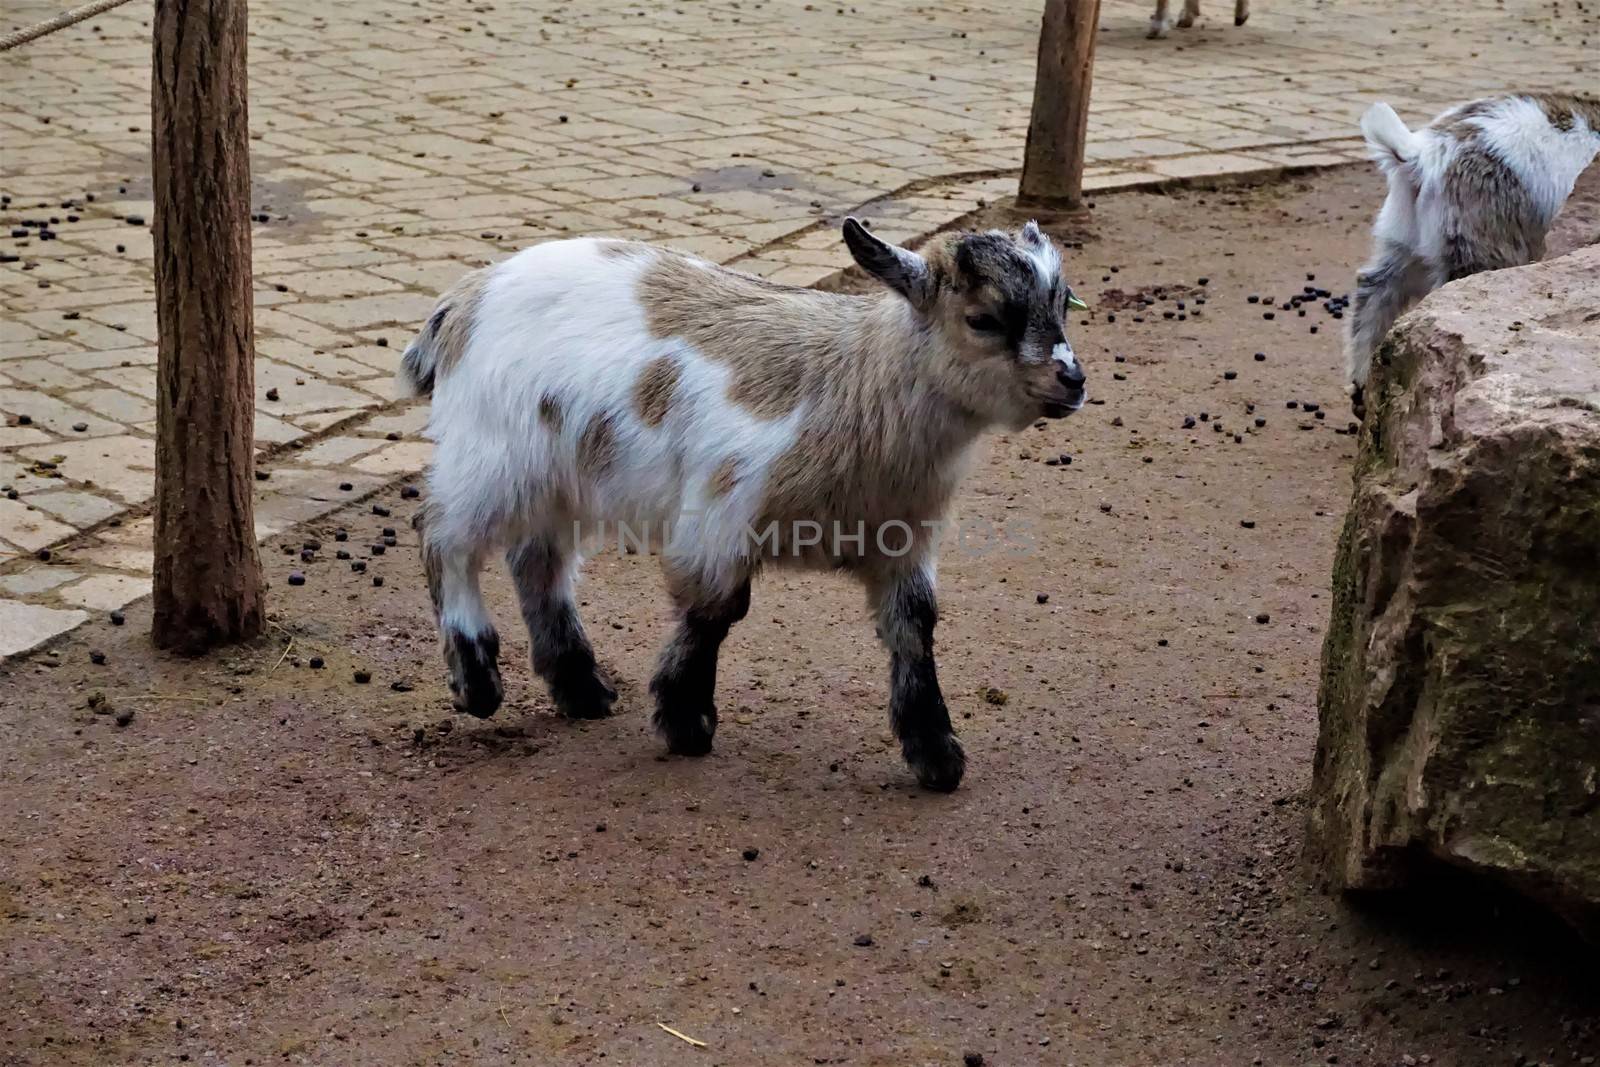 Little baby goat in the zoo by pisces2386